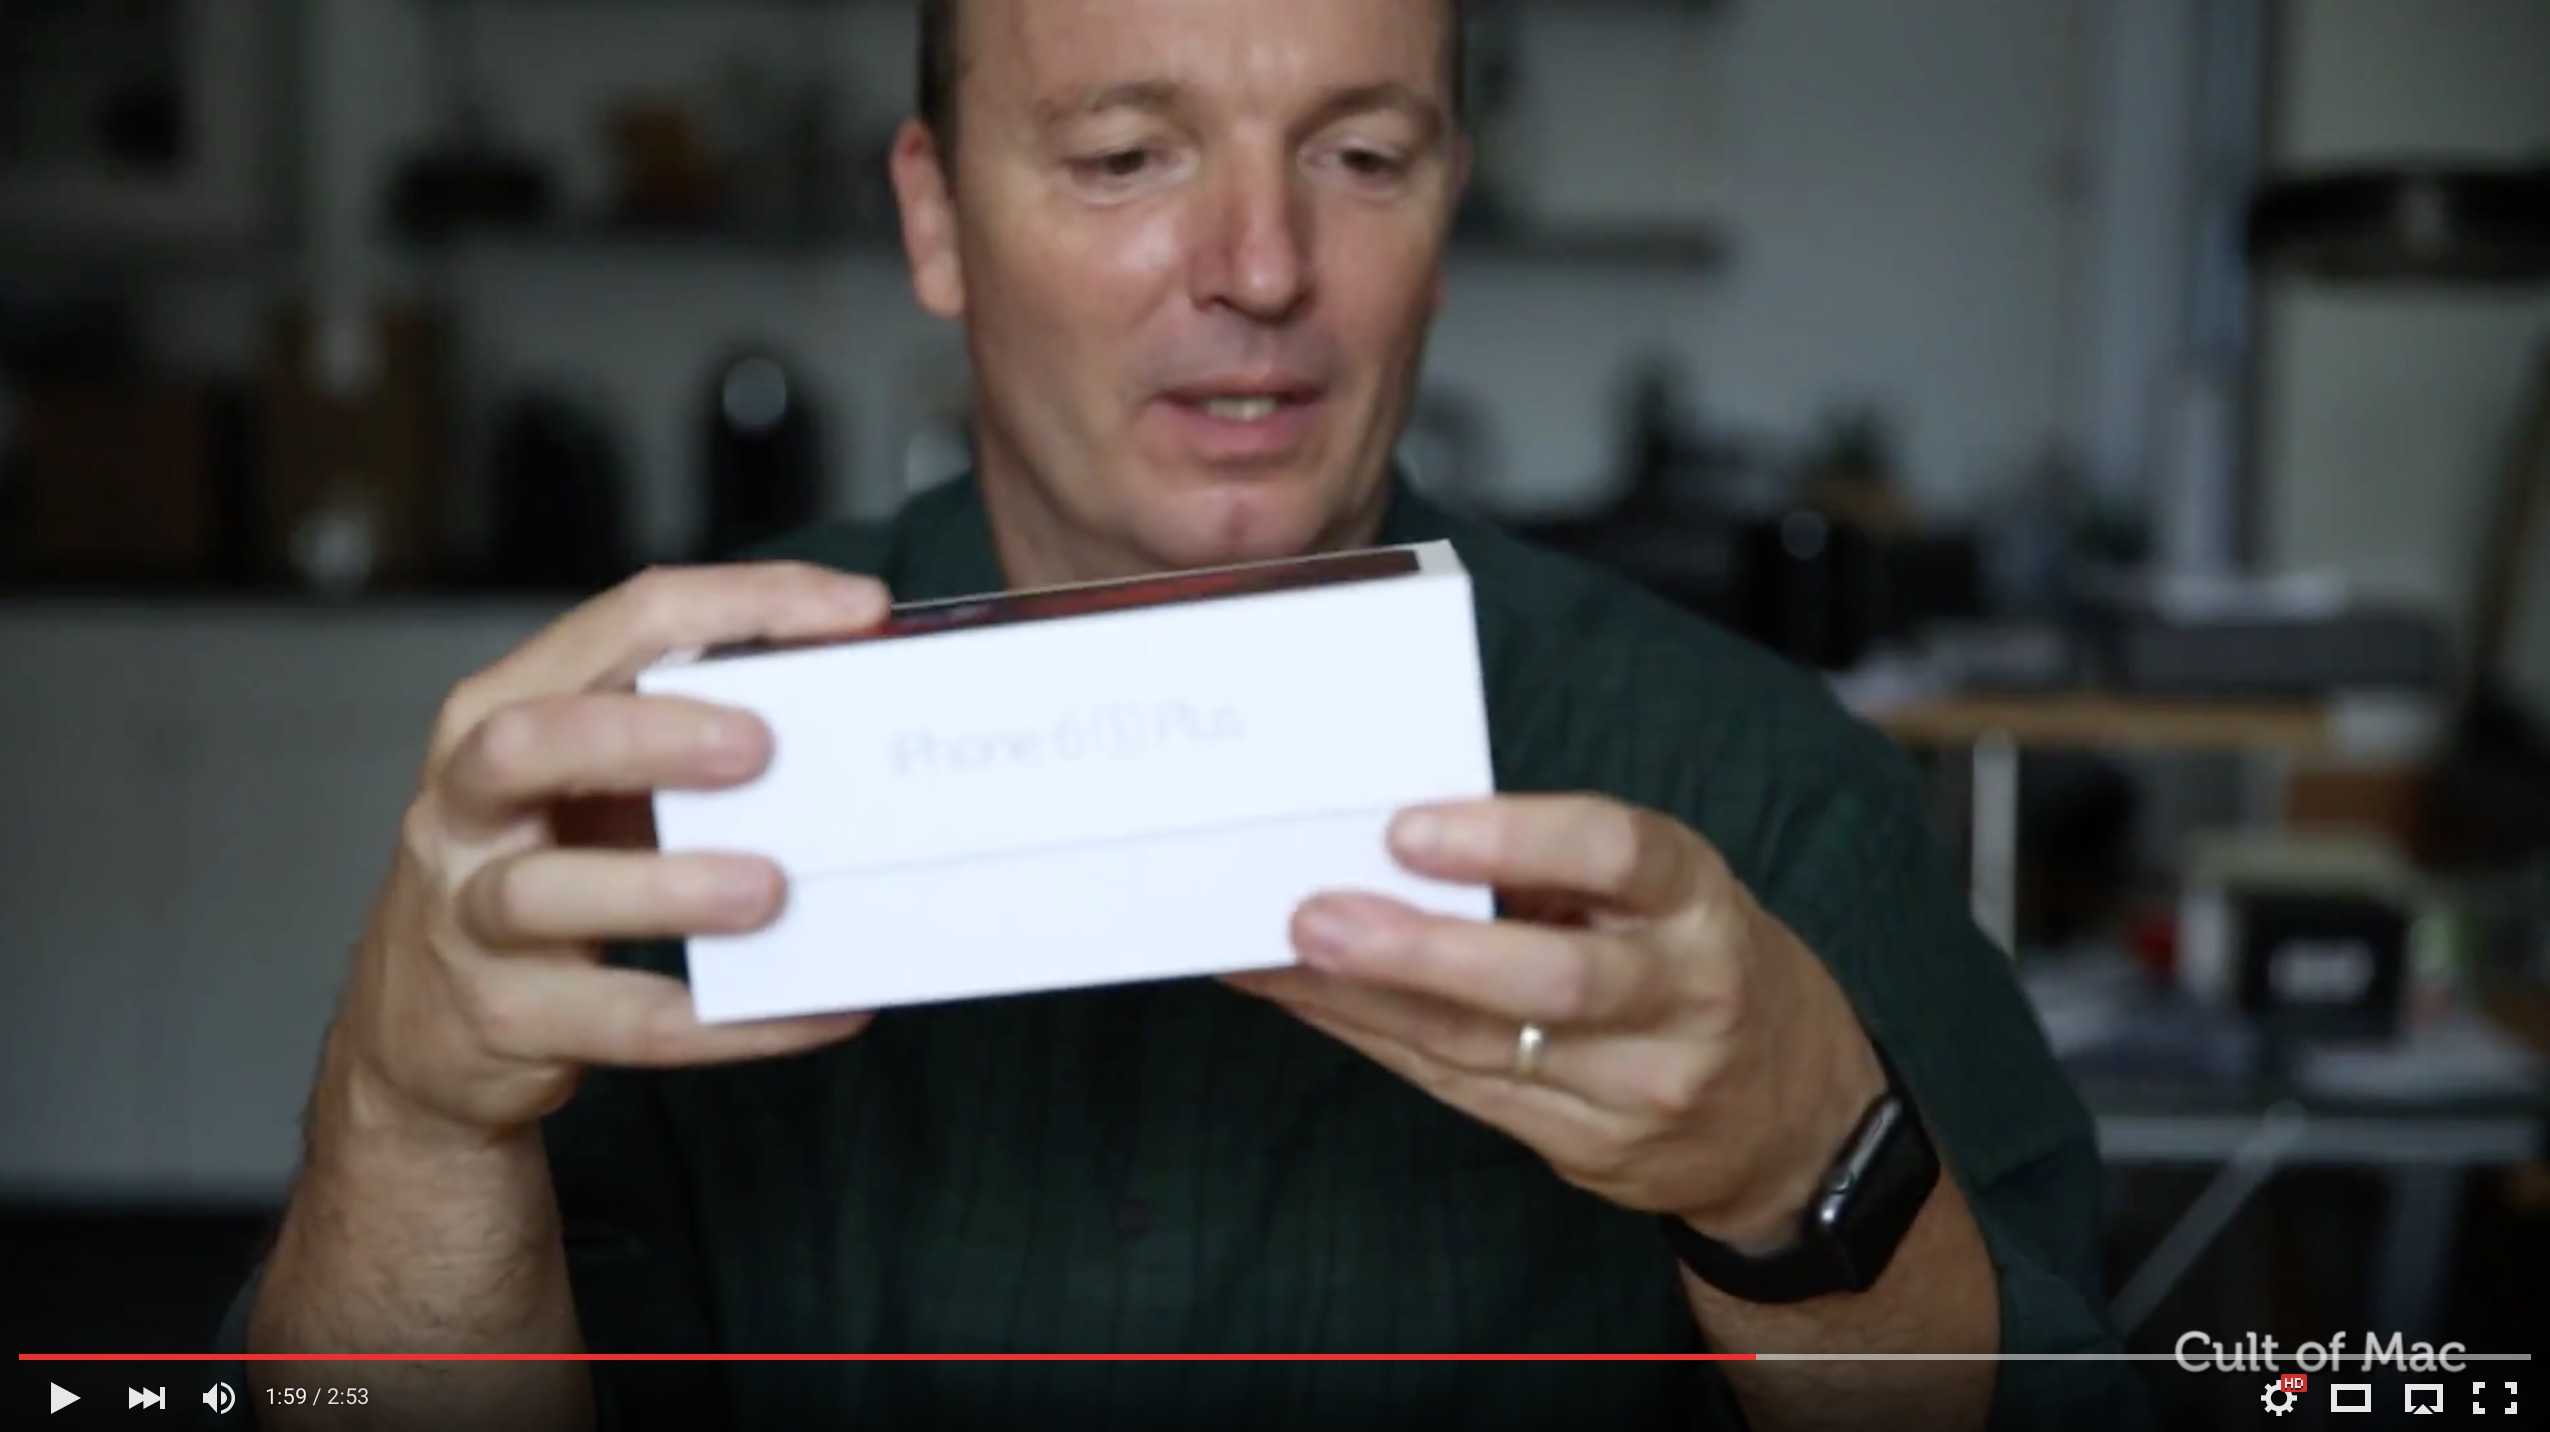 Check out our unboxing of Apple's new iPhone 6s Plus below.